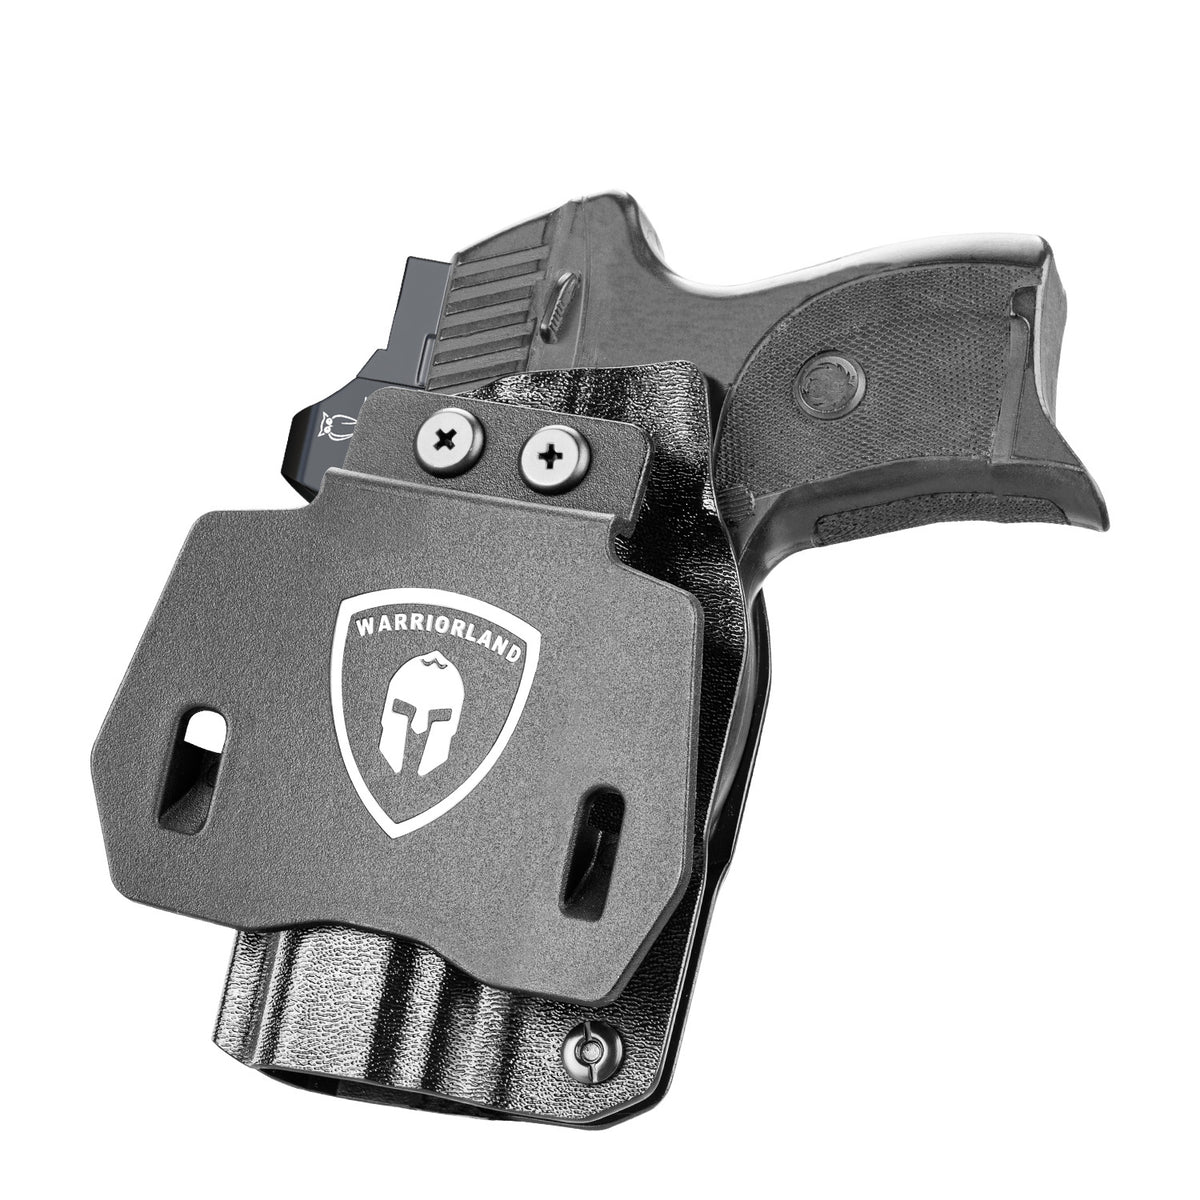 OWB Holster Optics Cut Fit Ruger Max-9 Pistol, Outside Waistband Open Carry Max 9 Holster with 1.75 Inch Paddle, Adj. Retention & Cant, Right Hand|WARRIORLAND